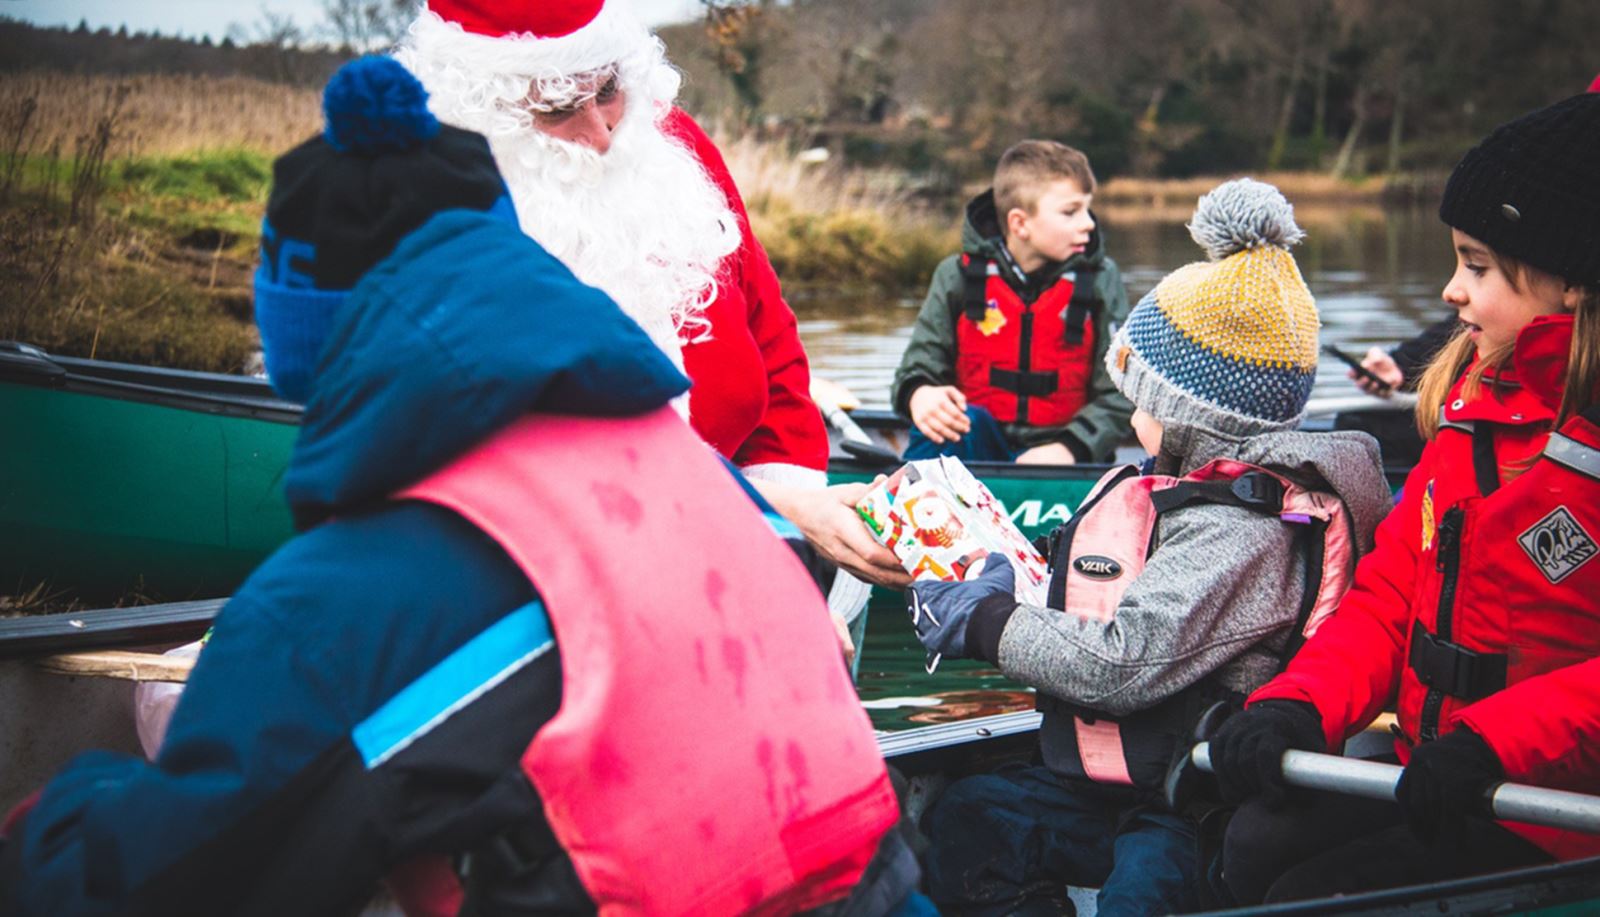 New Forest Activities' Christmas Canoe with Santa